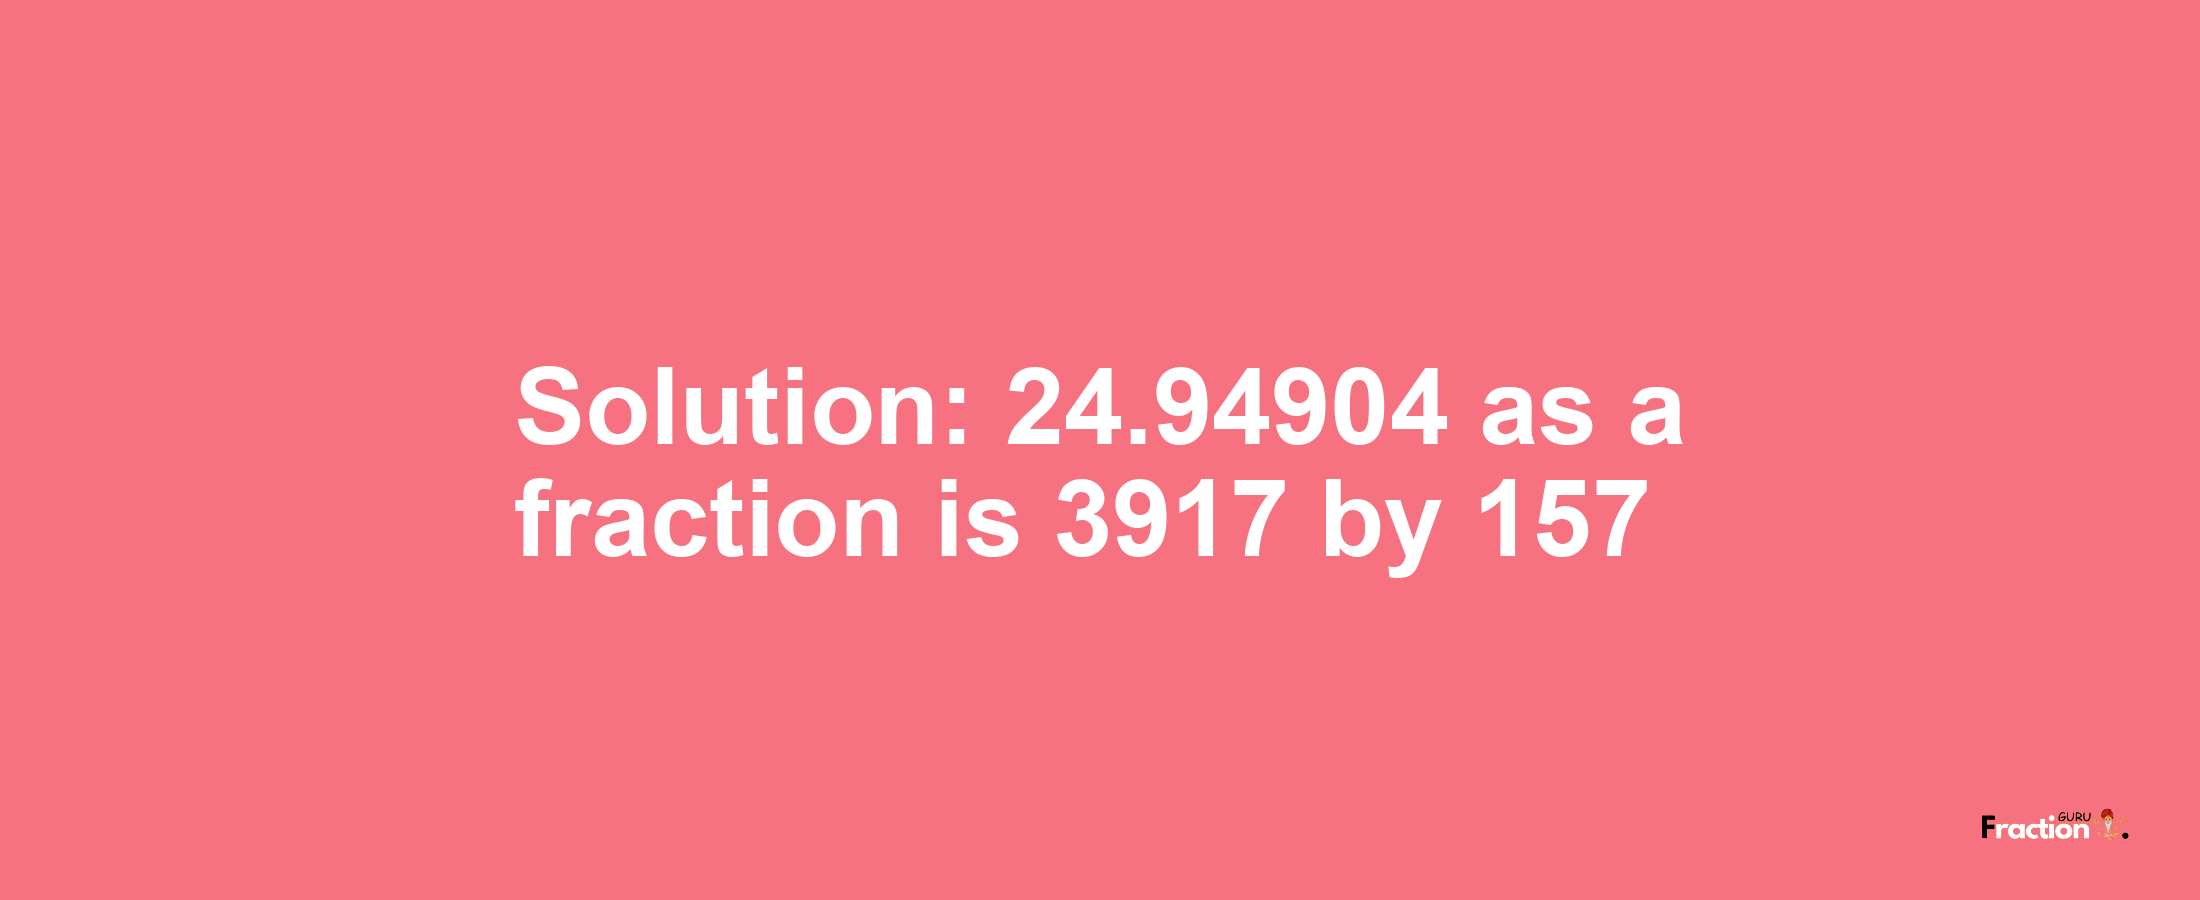 Solution:24.94904 as a fraction is 3917/157